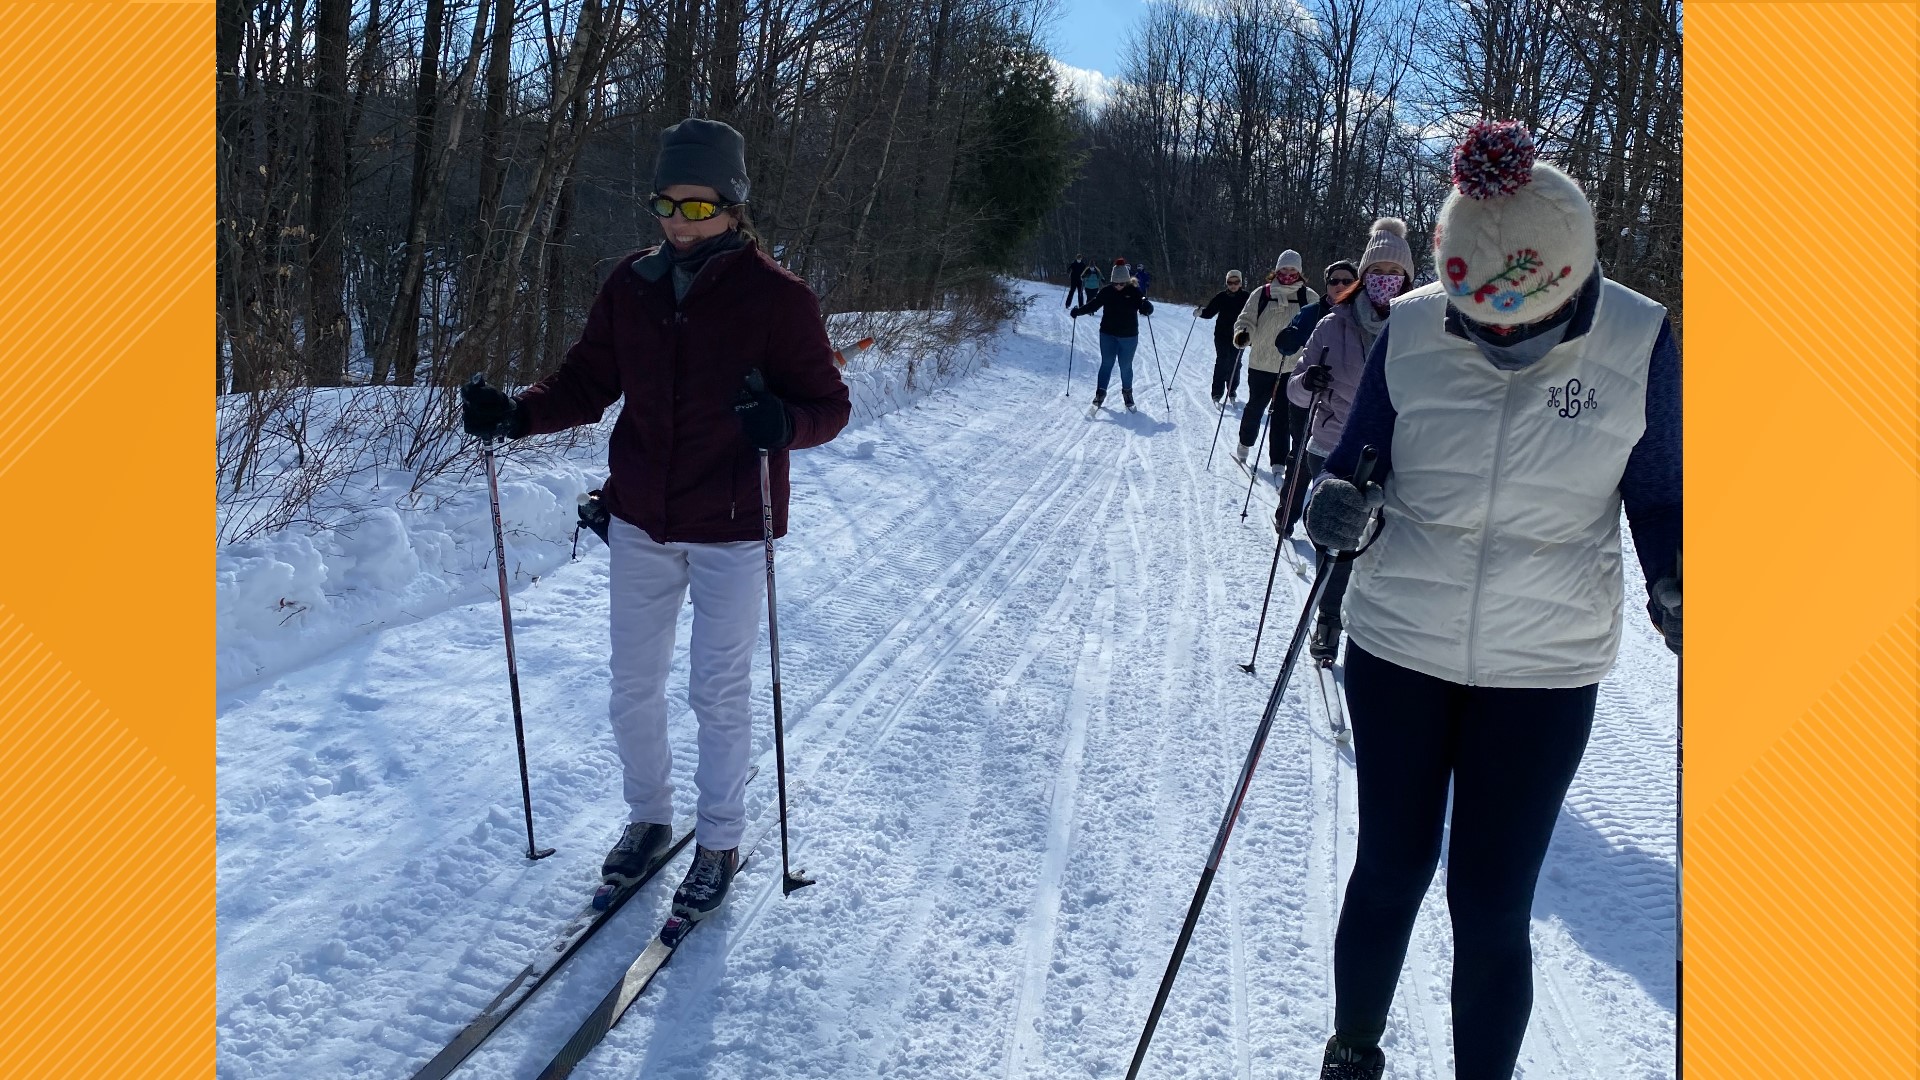 You may have heard the D & H Rail Trail was named best in the state. But what you might not know is all the fun winter activities you can enjoy on it.